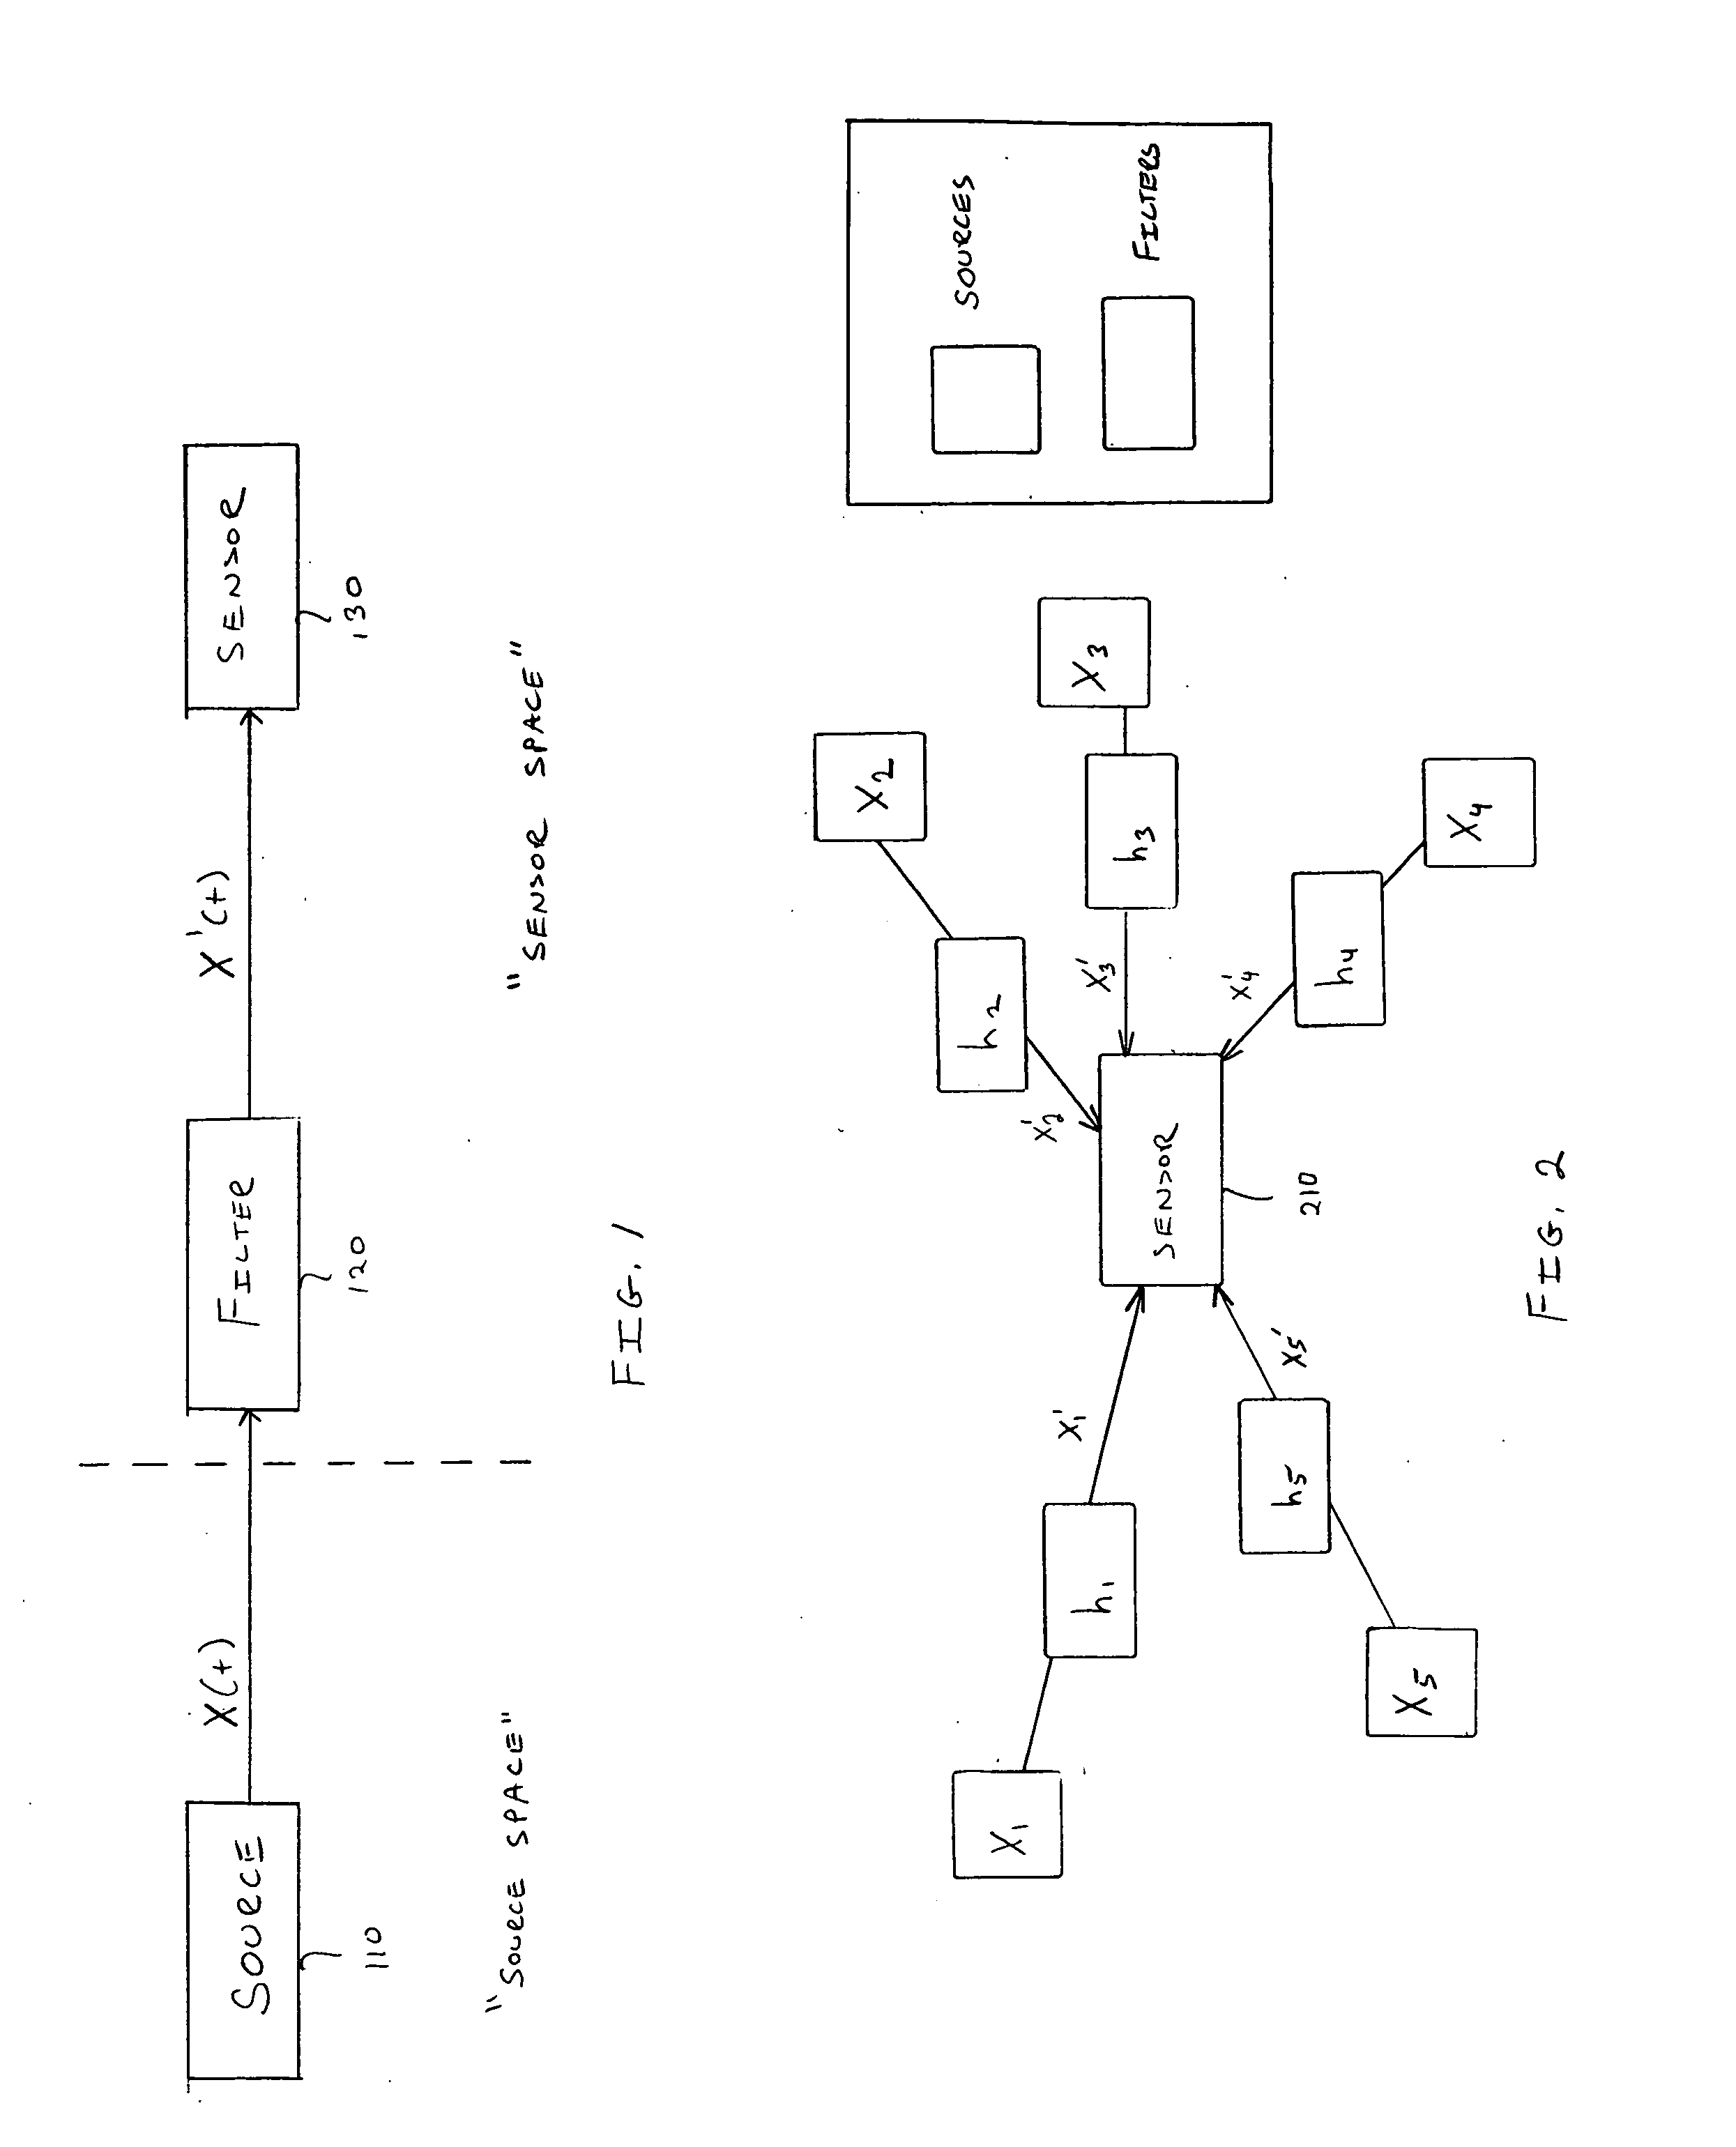 Systems and methods for separating multiple sources using directional filtering